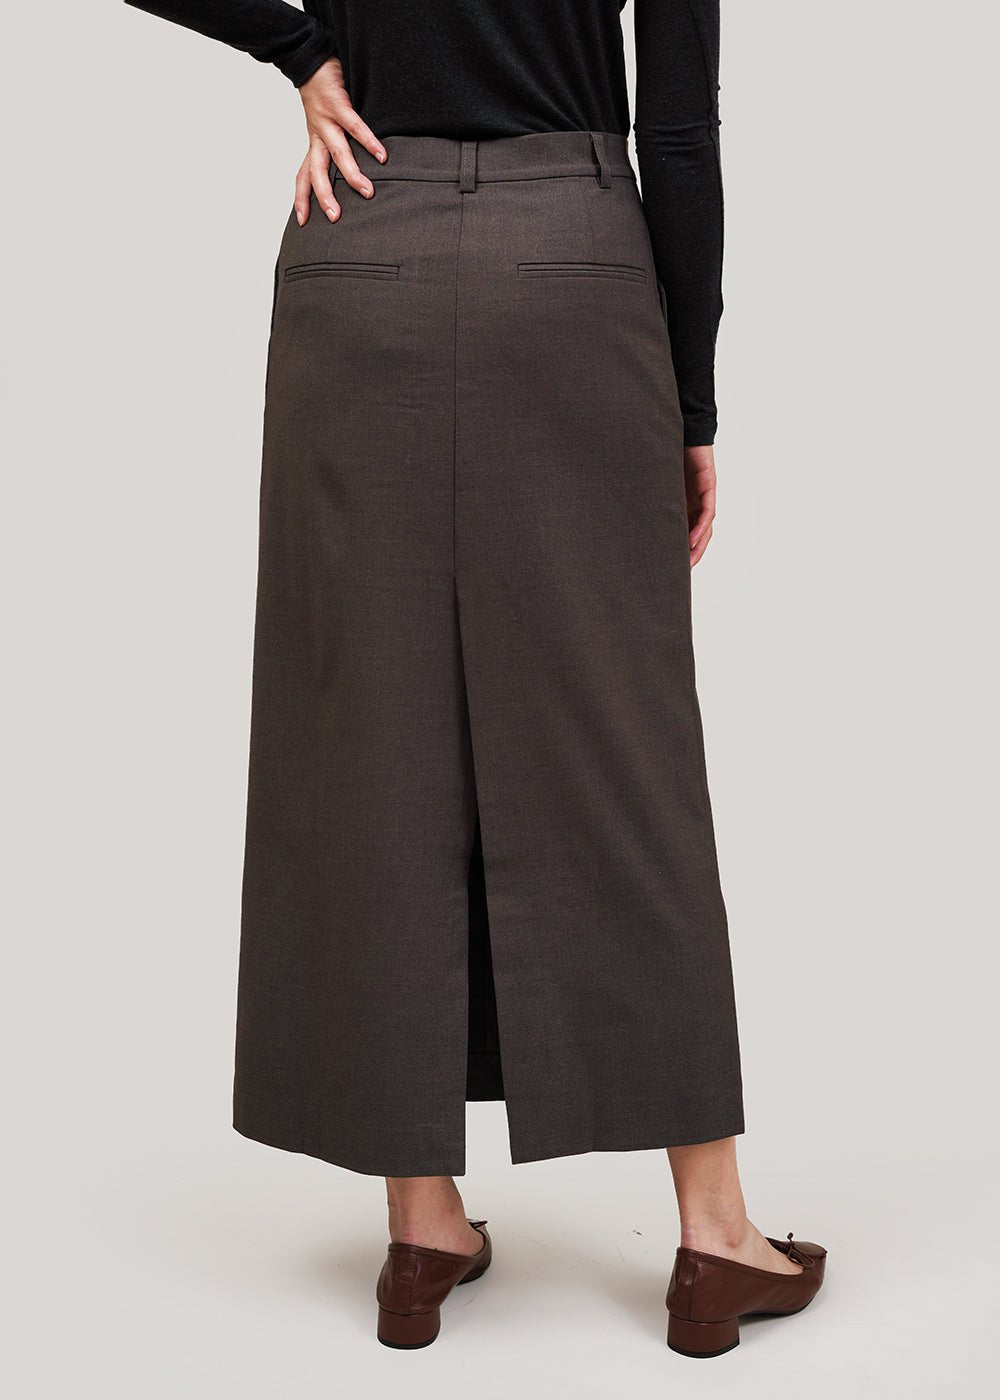 Wool Blend Midi Skirt in Heather Brown by MIJEONG PARK – New 